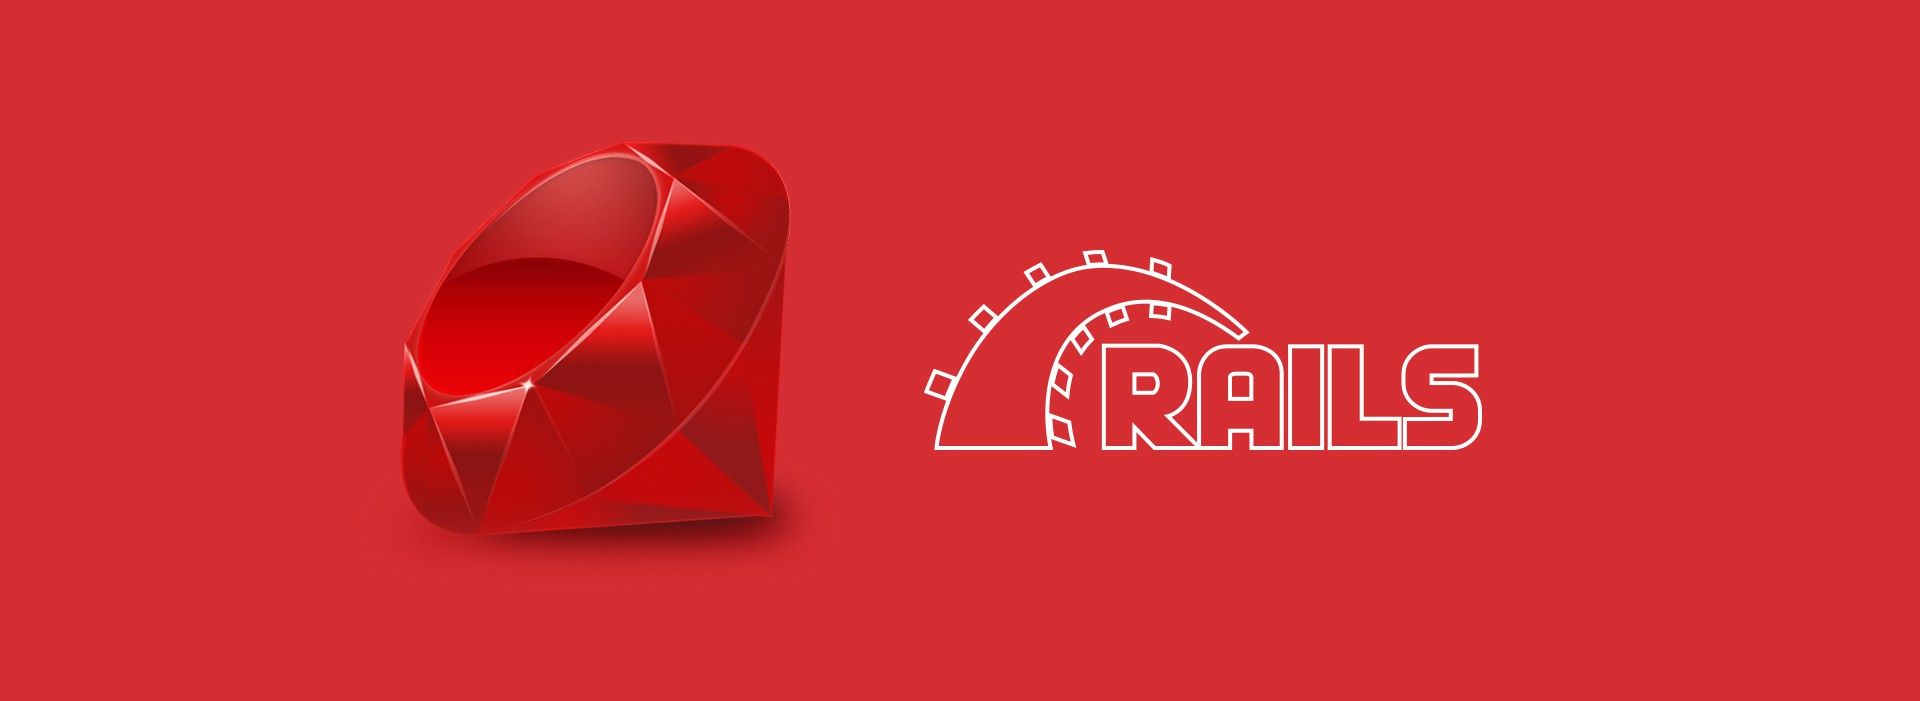 Your Guide to Hiring Ruby on Rails Developers